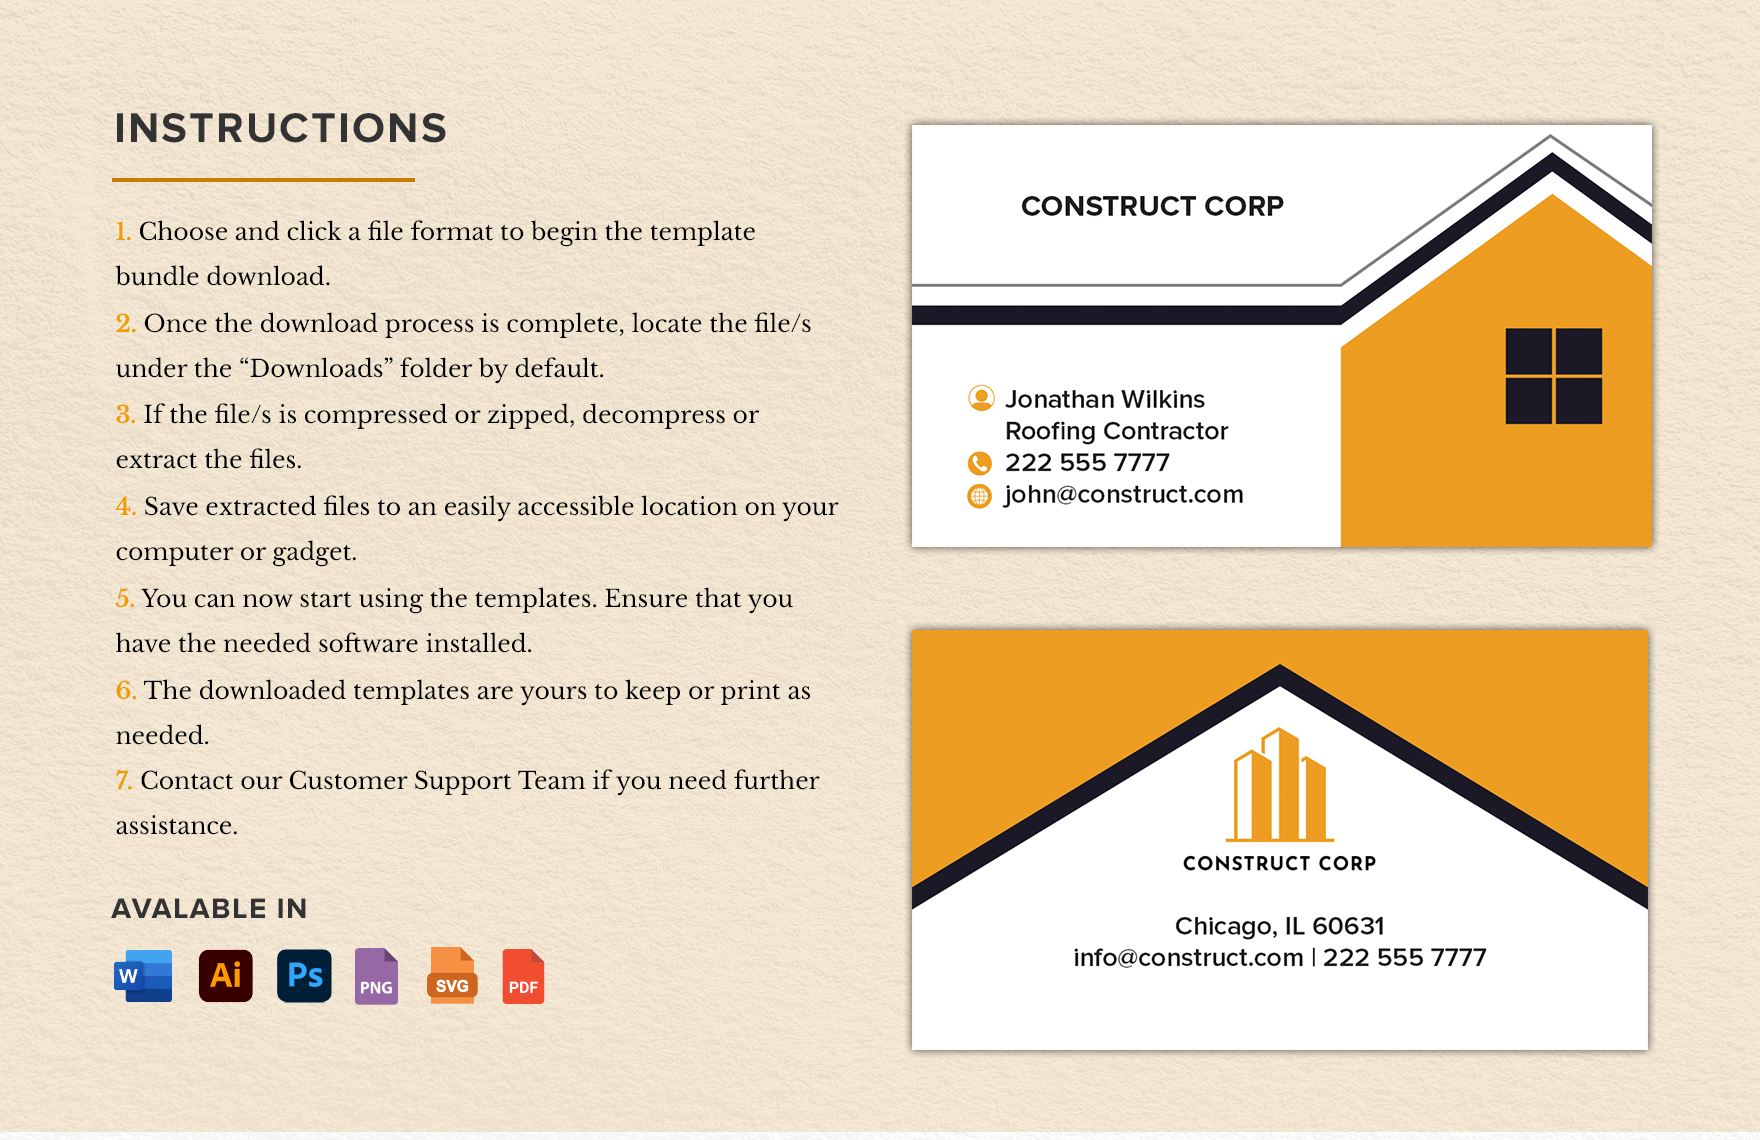 Roofing  Construction Company Business Card Template